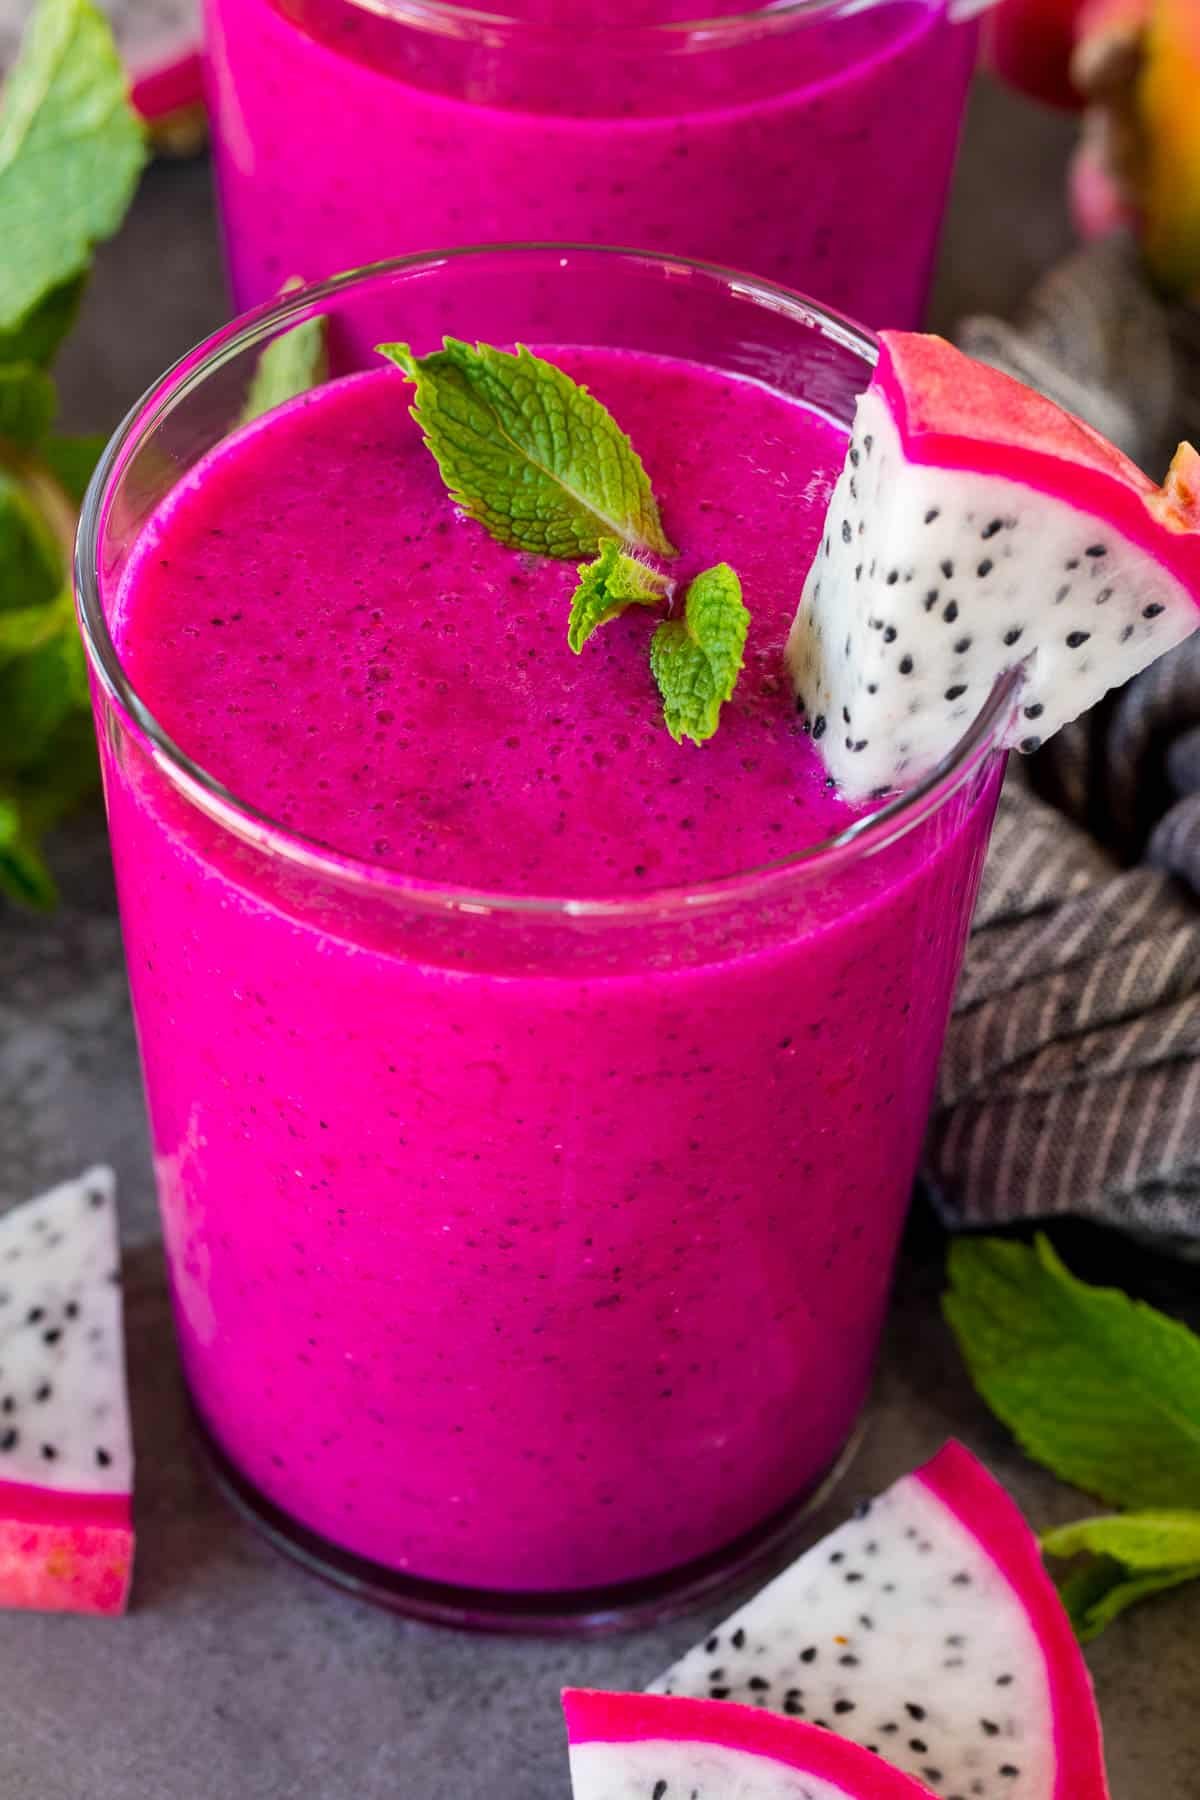 A glass of dragon fruit smoothie garnished with a mint sprig.